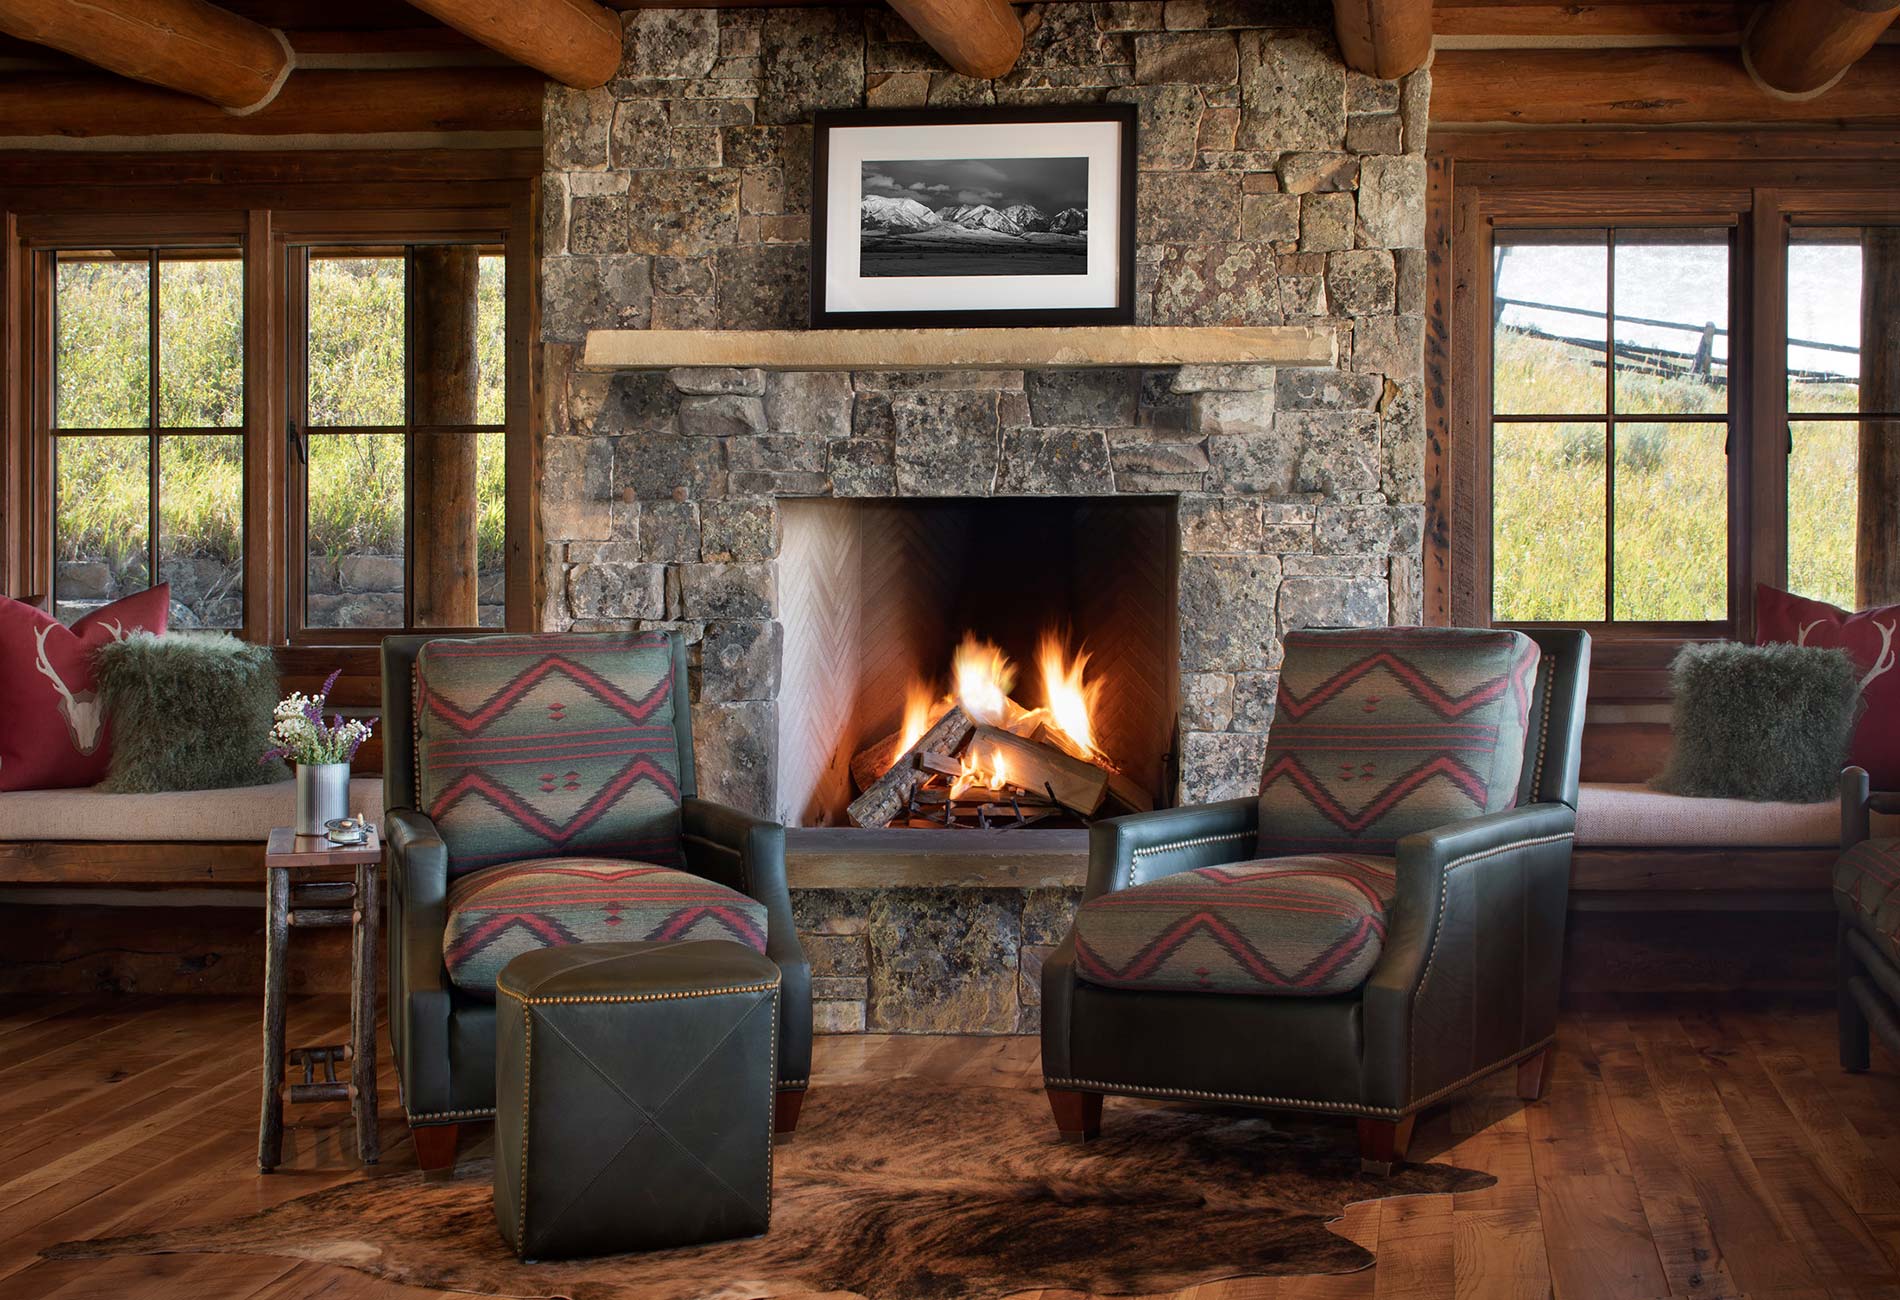 Leather chairs in front of a fireplace